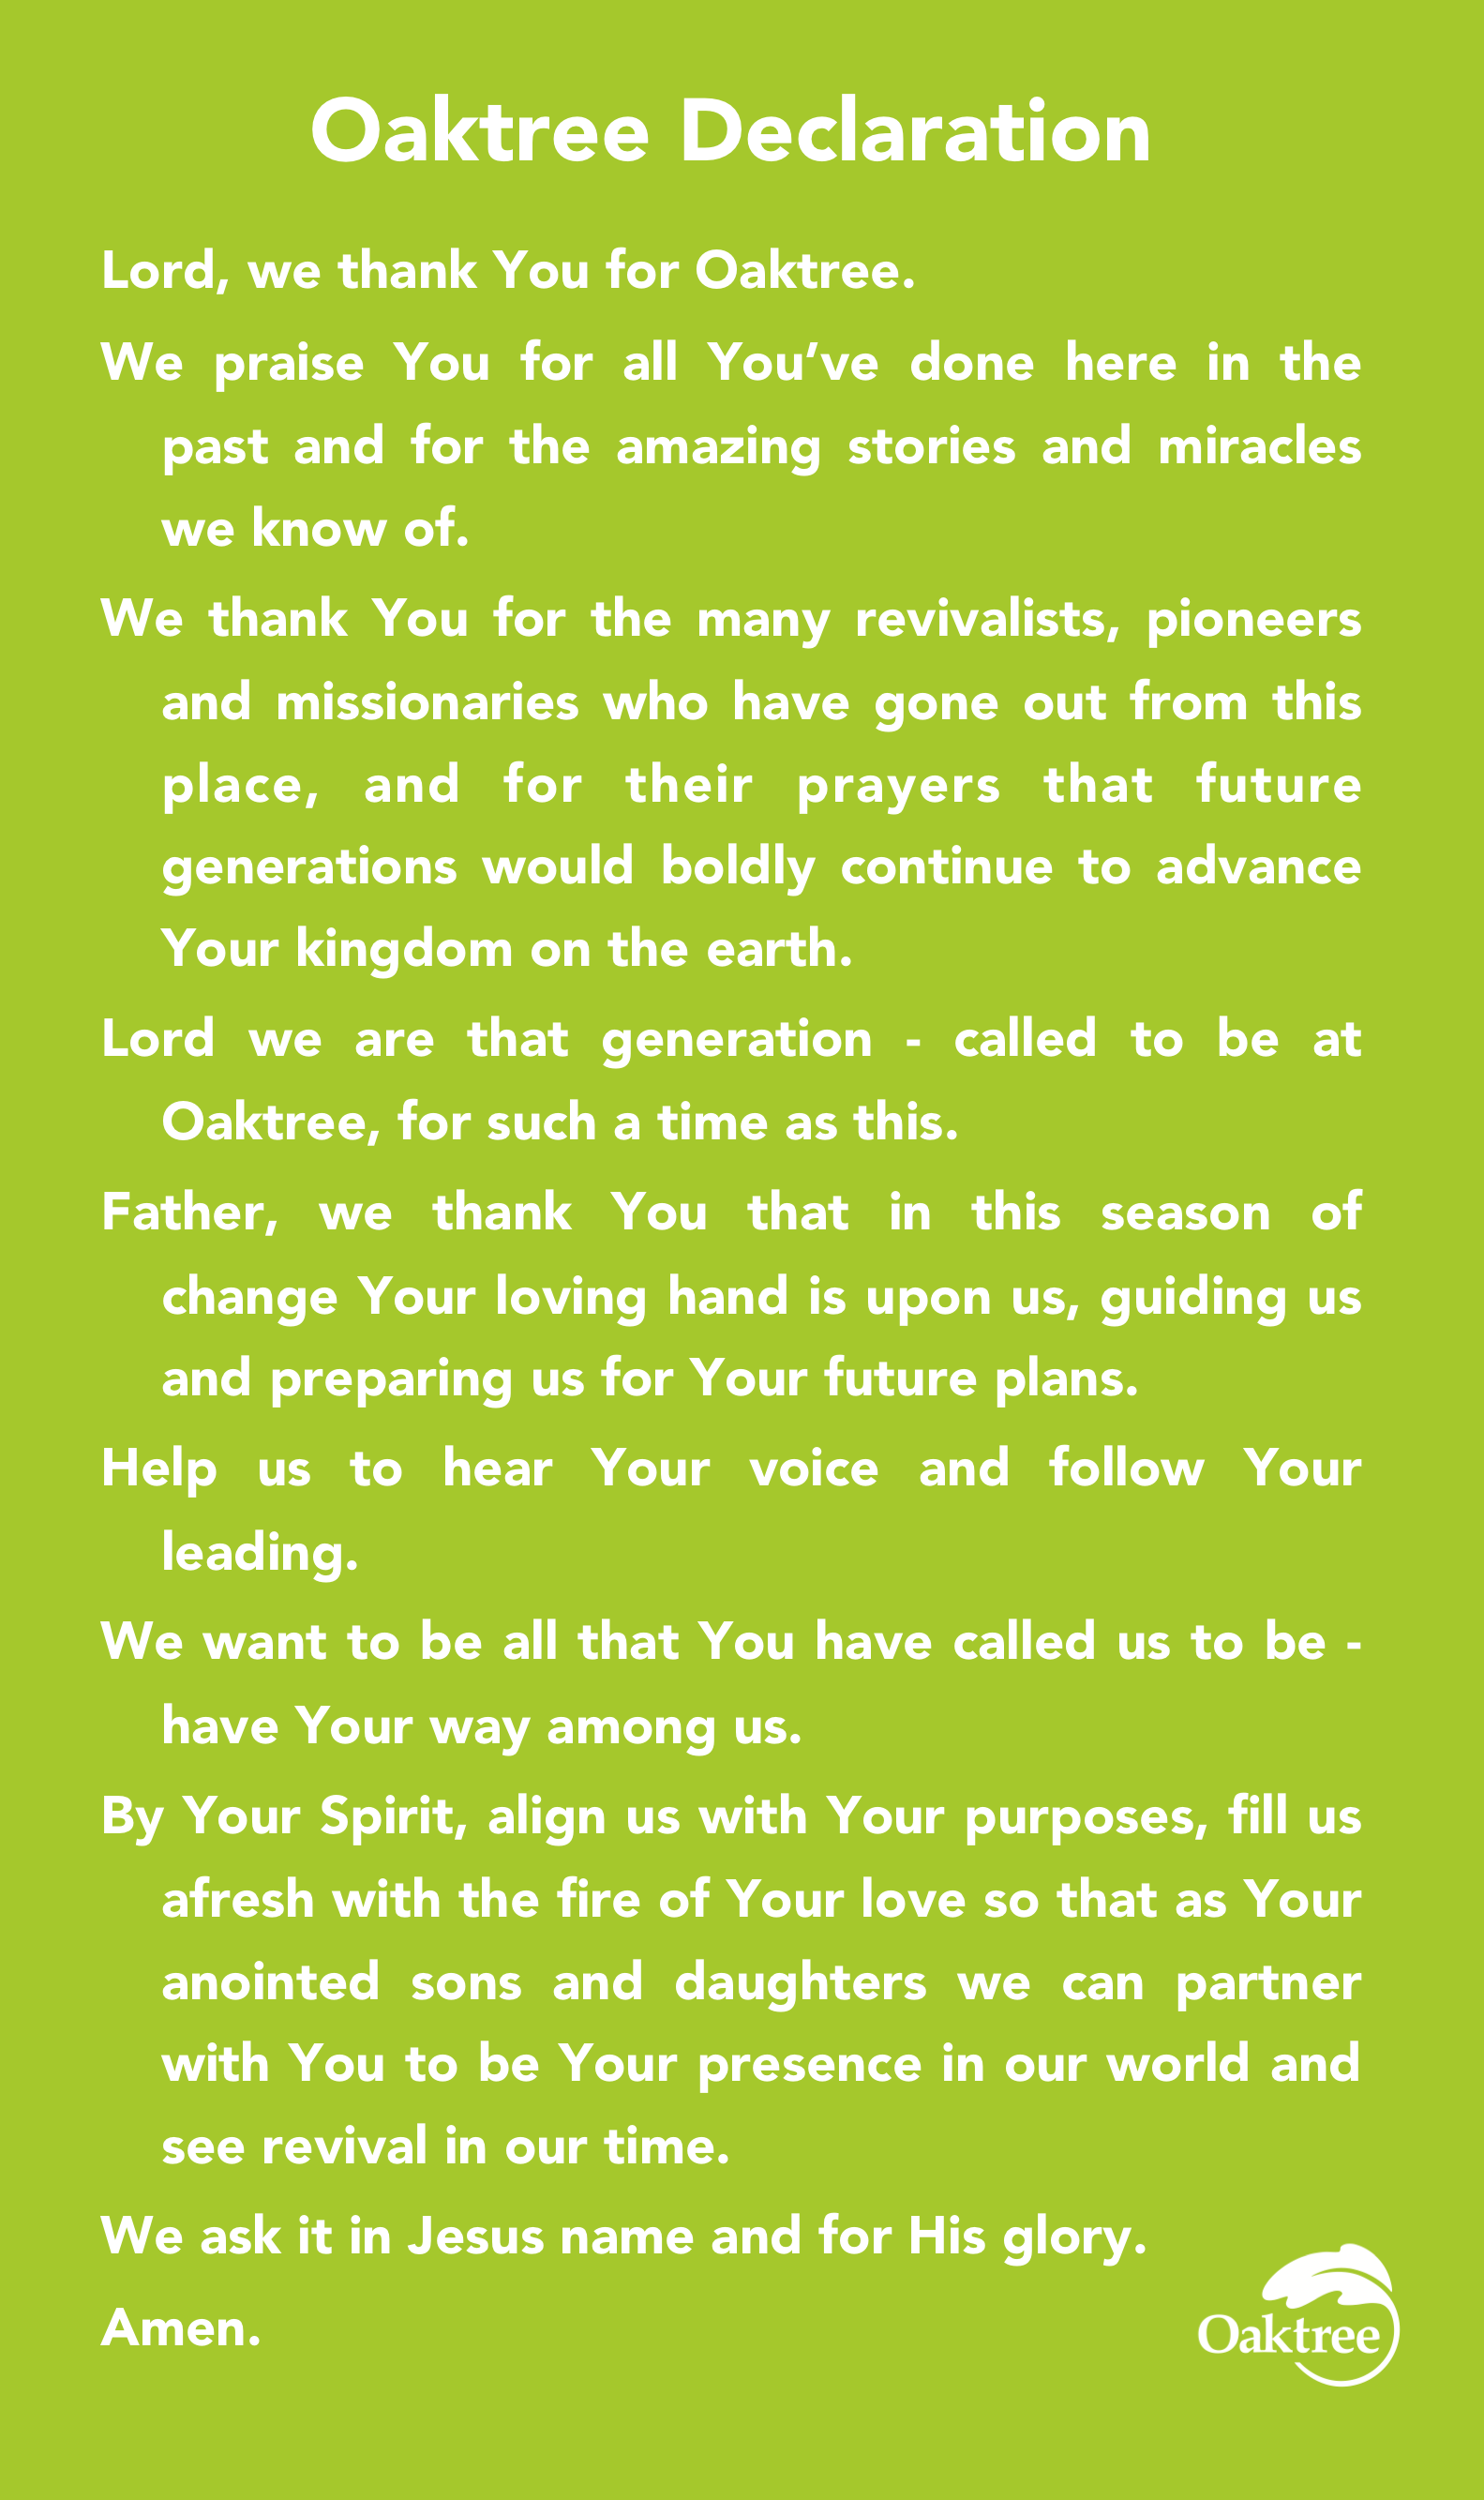 Oaktree Declaration Lord, we thank You for Oaktree. We praise You for all You’ve done here in the past and for the amazing stories and miracles we know of. We thank You for the many revivalists, pioneers and missionaries who have gone out from this place, and for their prayers that future generations would boldly continue to advance Your kingdom on the earth. Lord we are that generation - called to be at Oaktree, for such a time as this. Father, we thank You that in this season of change Your loving hand is upon us, guiding us and preparing us for Your future plans. Help us to hear Your voice and follow Your leading. We want to be all that You have called us to be - have Your way among us. By Your Spirit, align us with Your purposes, fill us afresh with the fire of Your love so that as Your anointed sons and daughters we can partner with You to be Your presence in our world and see revival in our time. We ask it in Jesus name and for His glory. Amen.